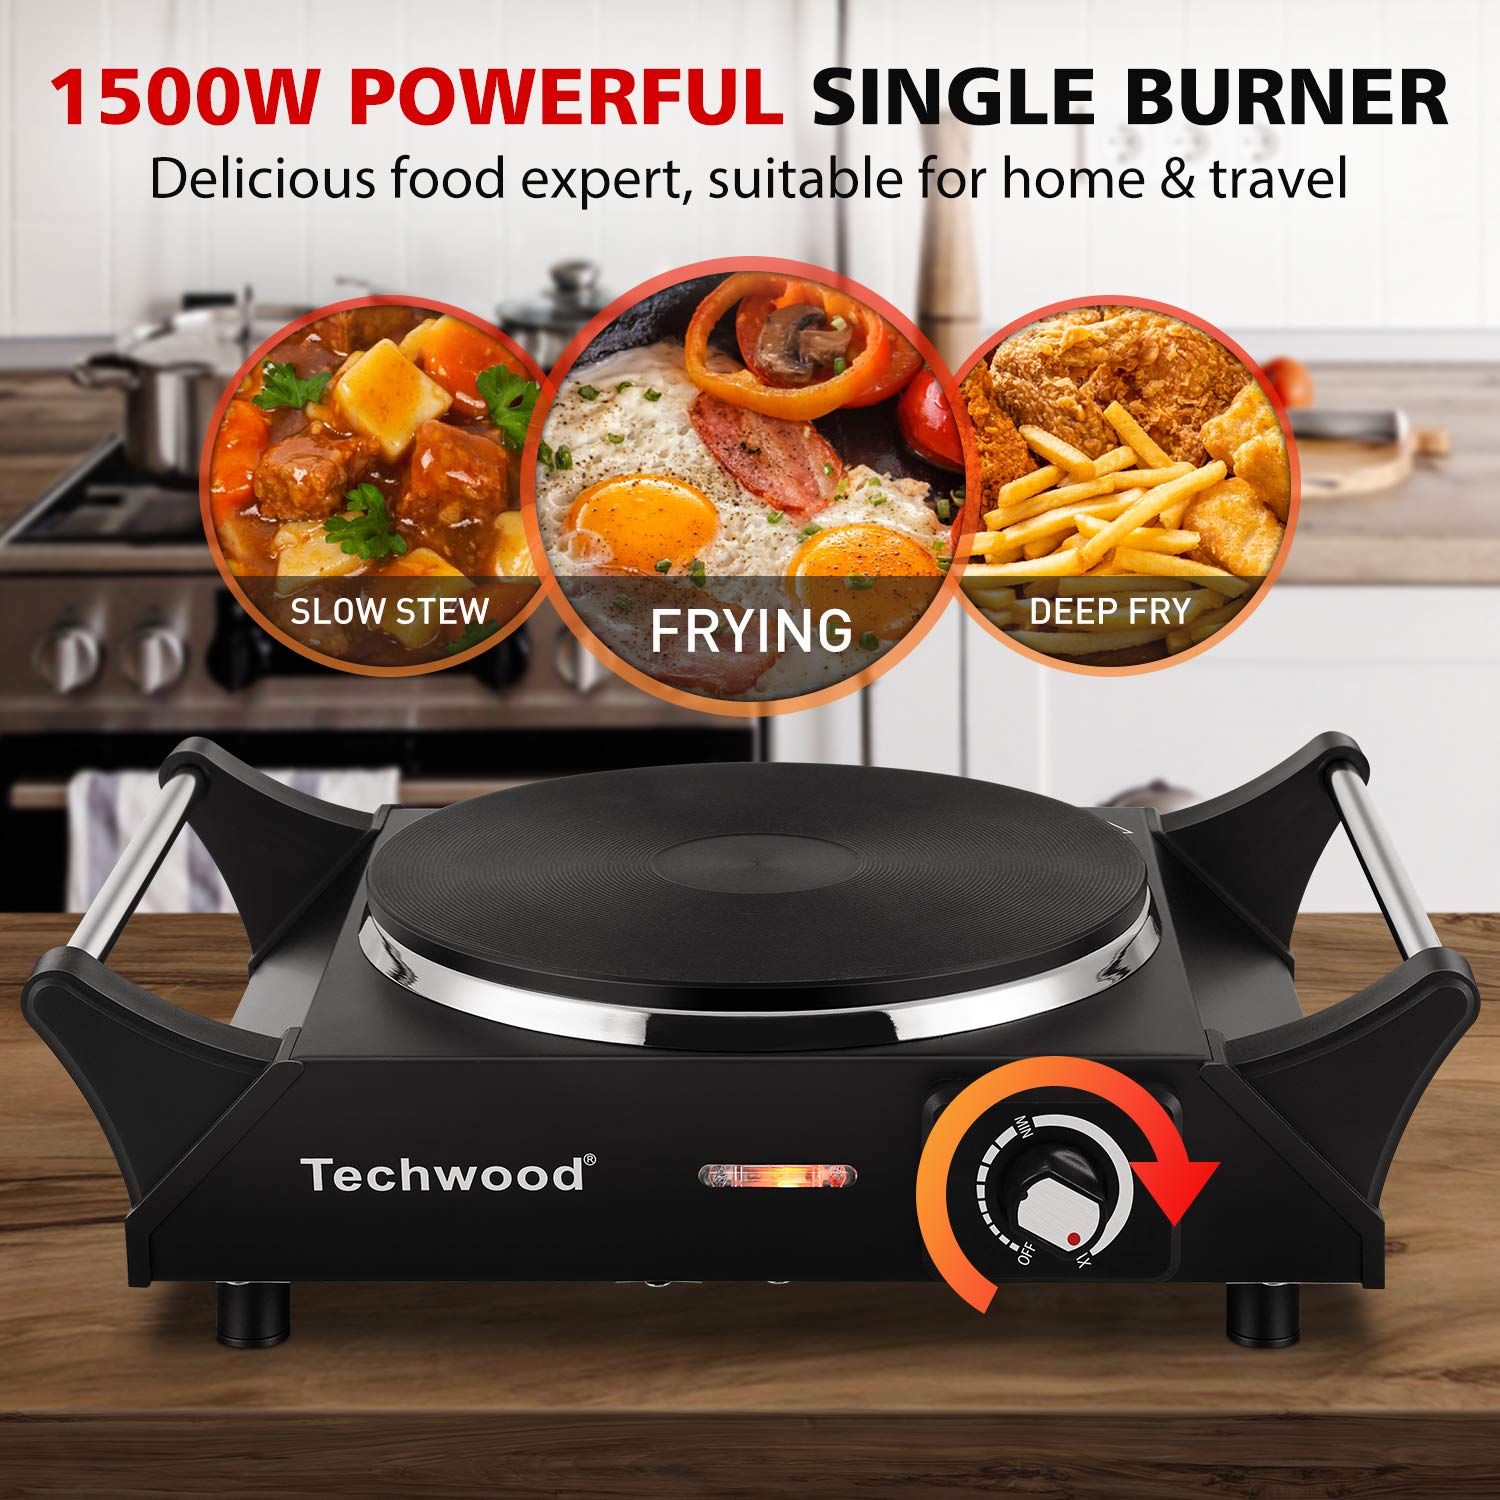 1500W Hot Plate for Cooking Electric Single Burner with Handles 6